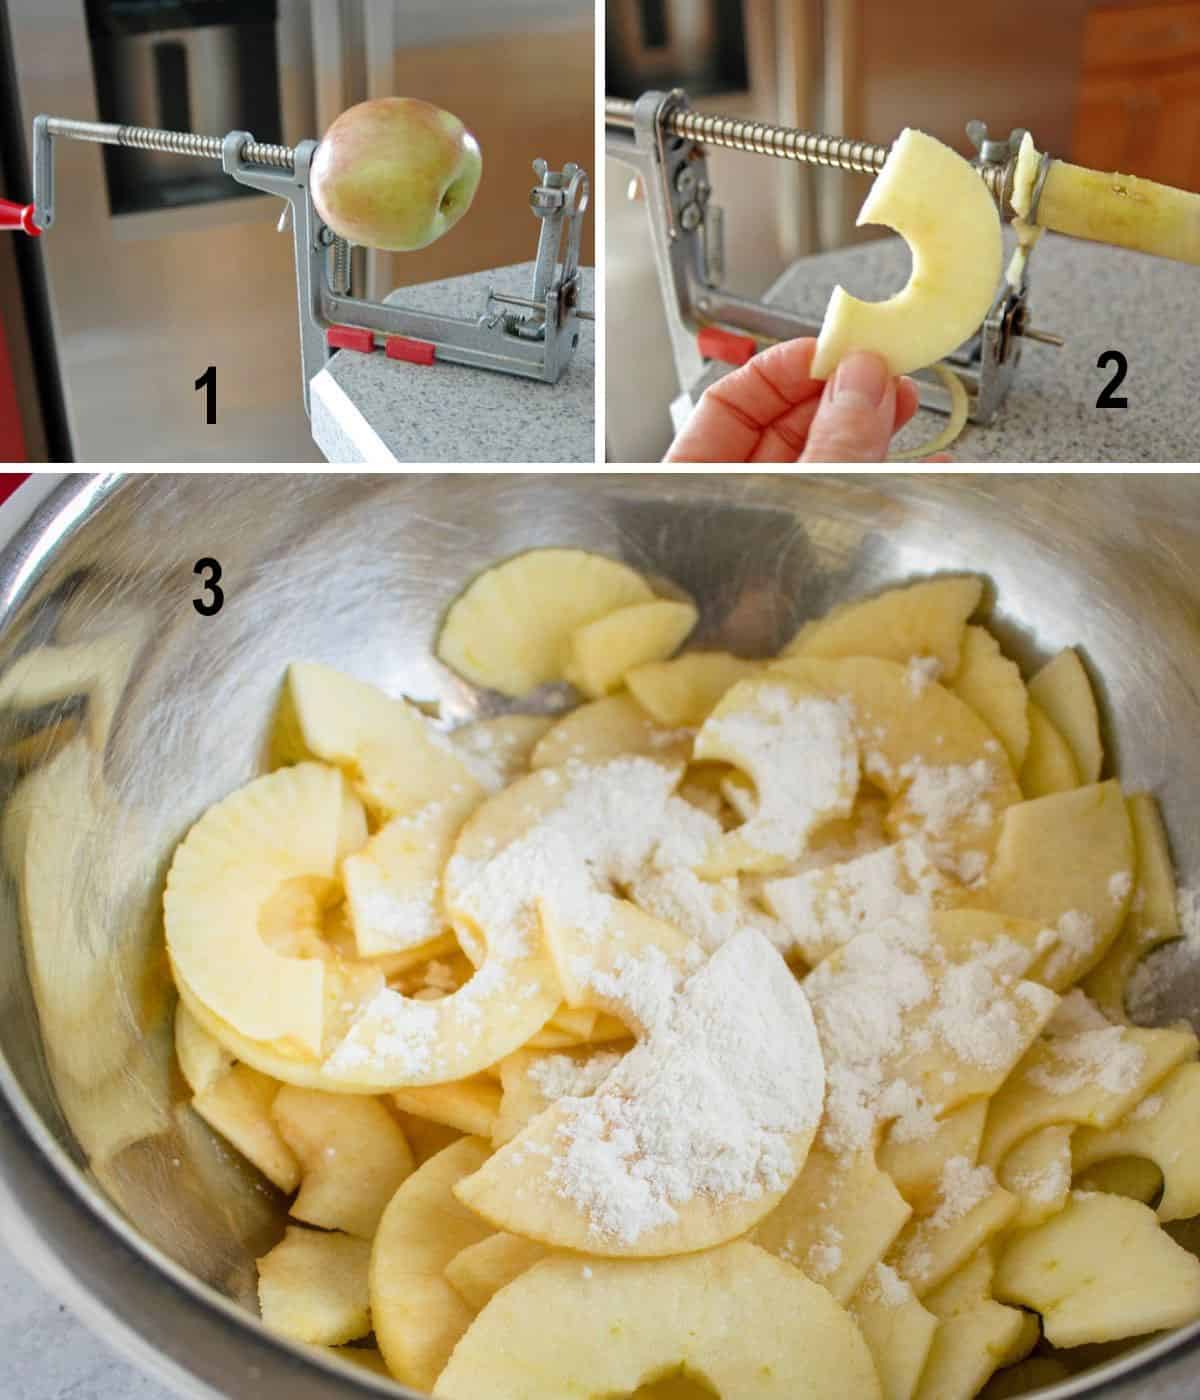 apple on coring device, holding apple slice, bowl of apple slices with flour